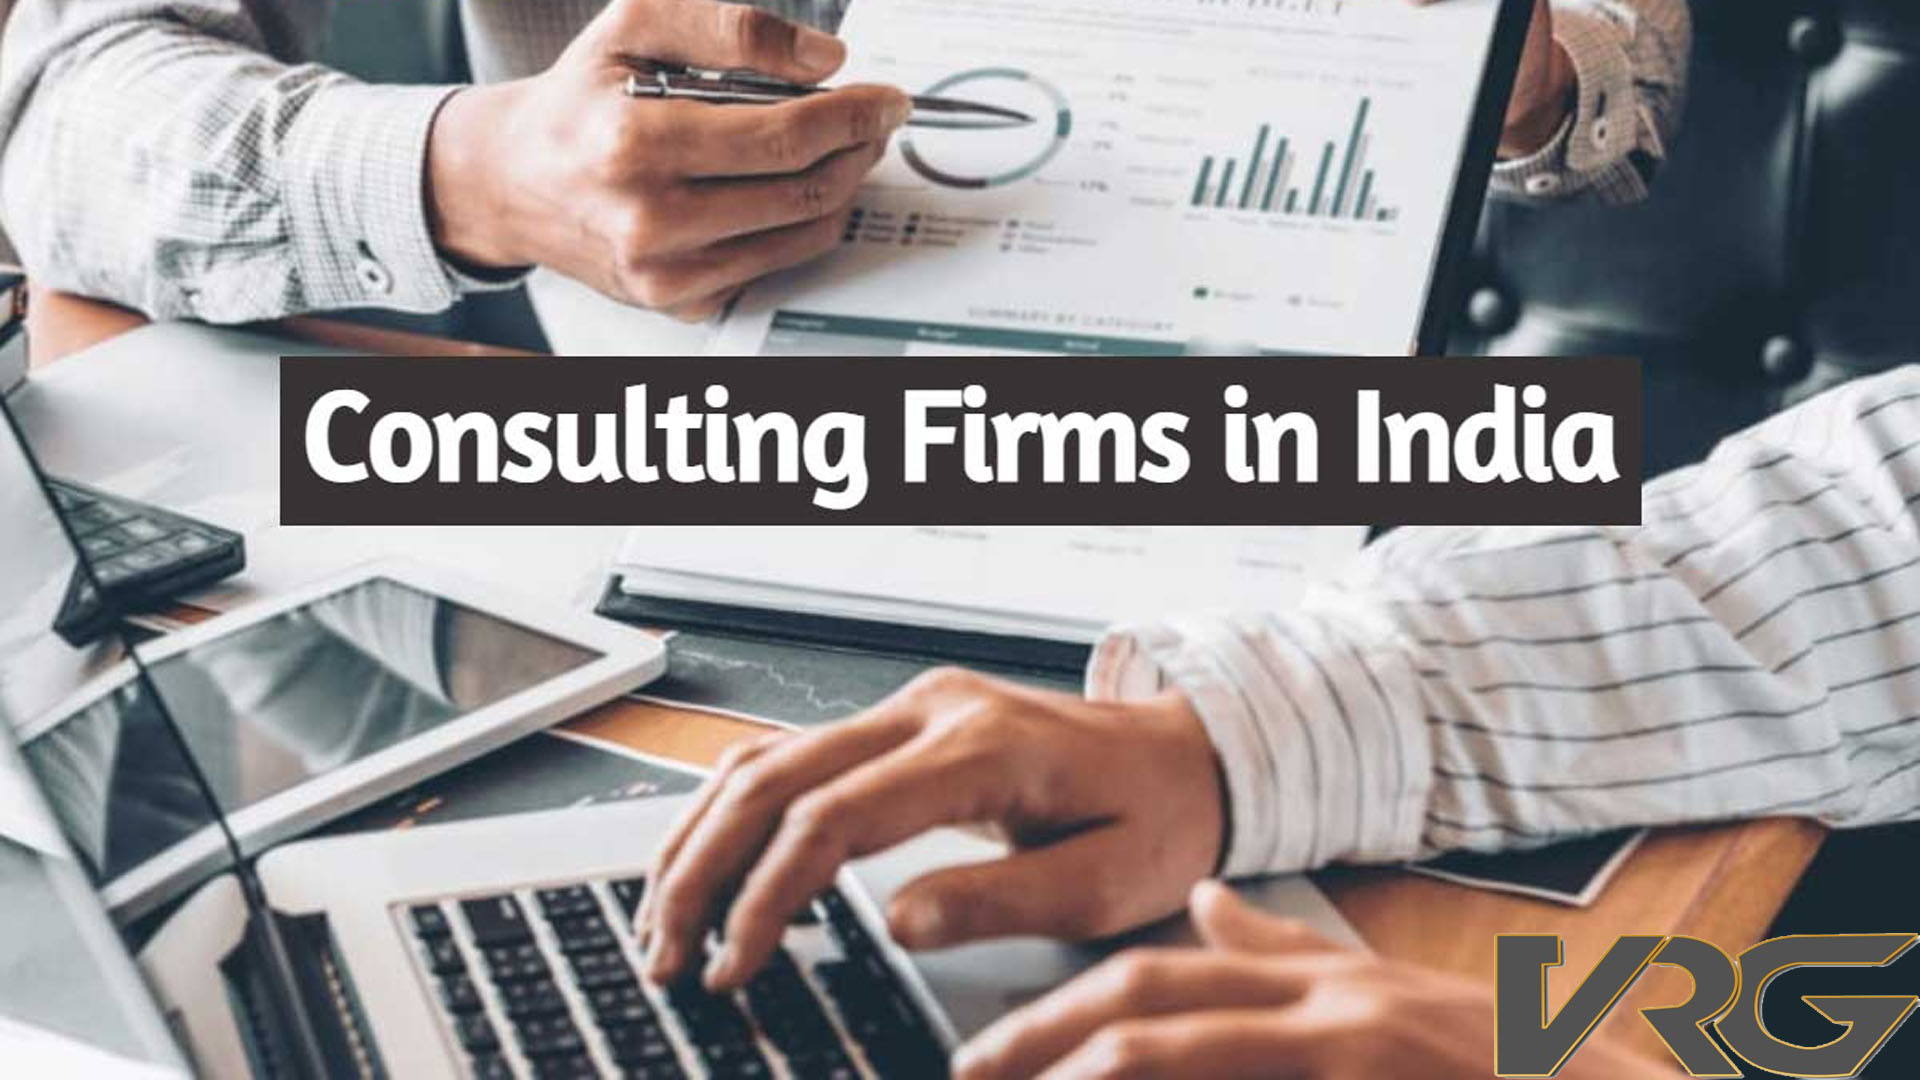 Top IT consulting firms in India